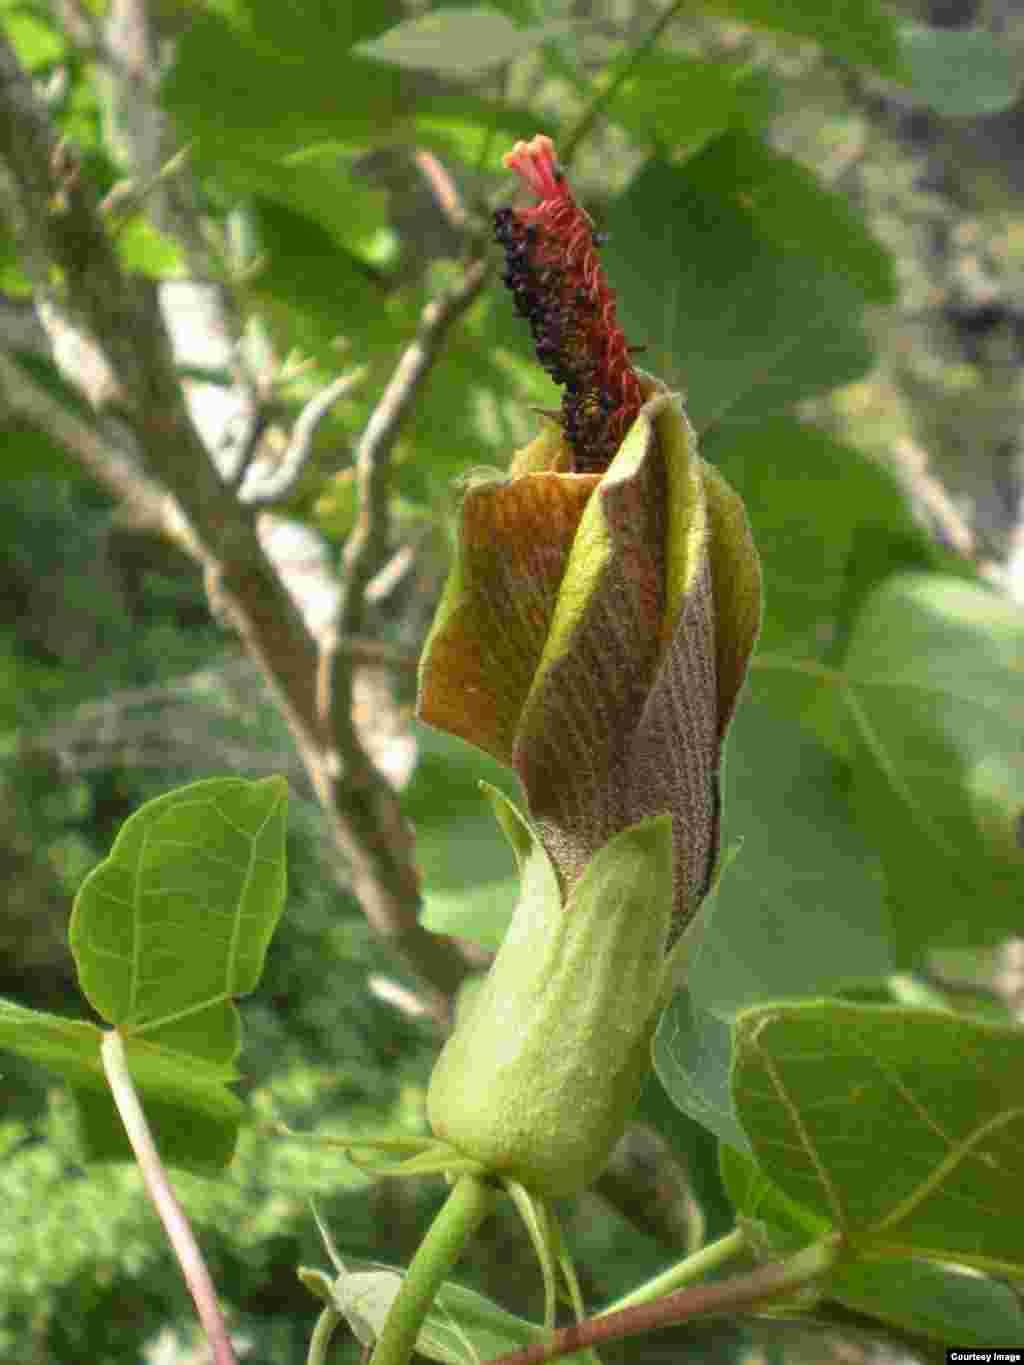 A population of Hibiscadelphus stellatus was discovered in a remote, steep valley on the west side of Maui in 2012 by Steve Perlman, Hank Oppenheimer and Keahi Bustament. (Photo by ©Hank Oppenheimer)